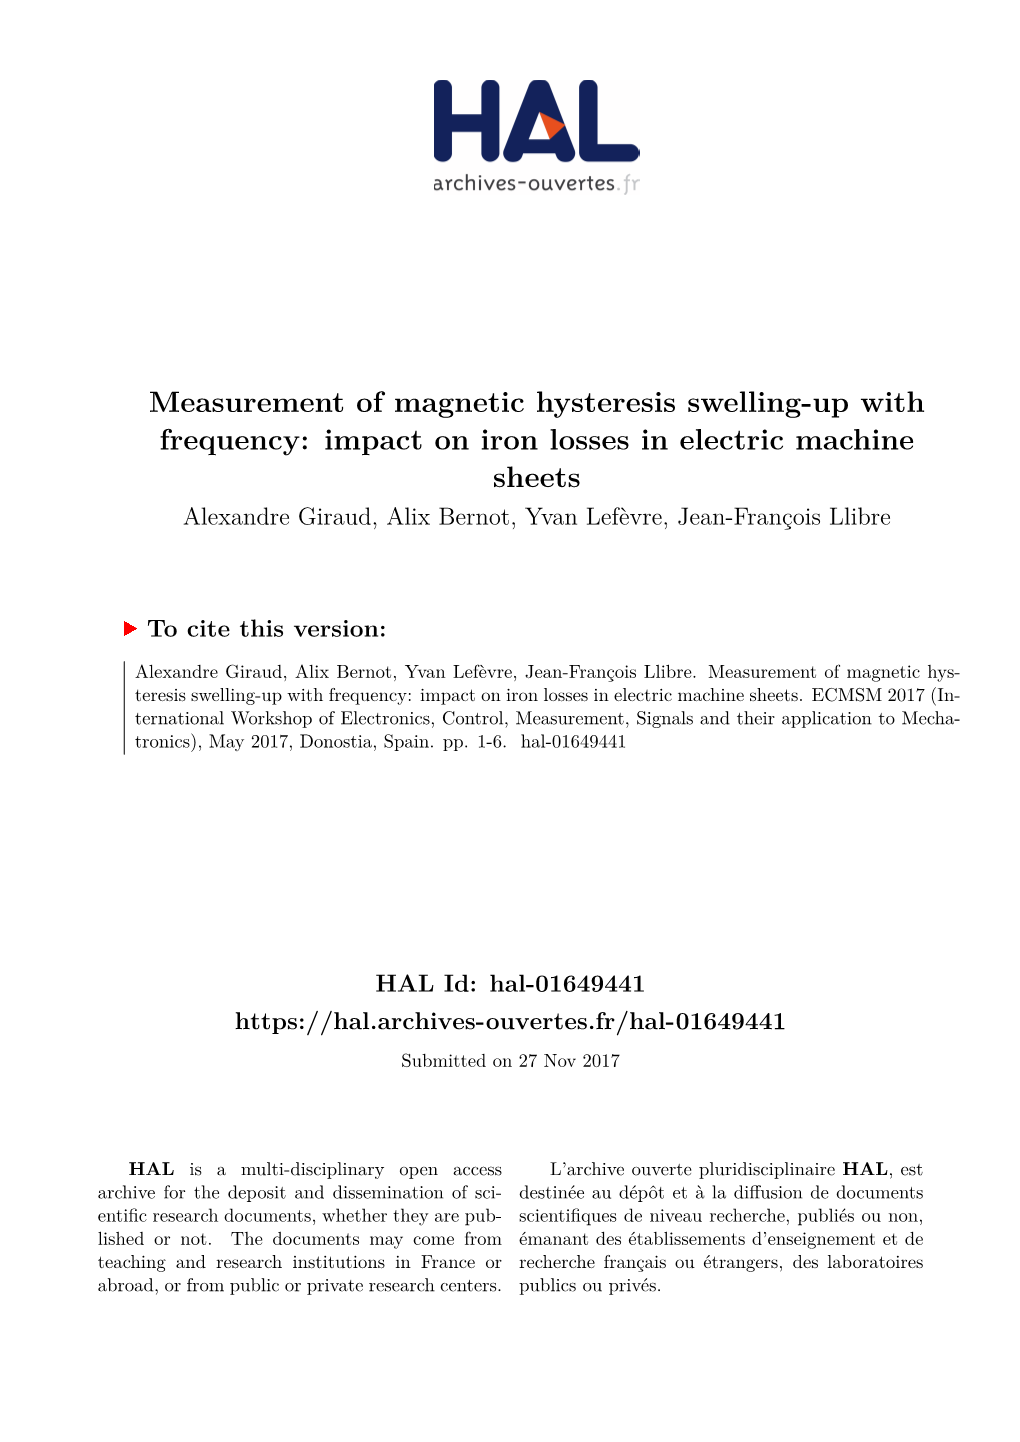 Measurement of Magnetic Hysteresis Swelling-Up with Frequency